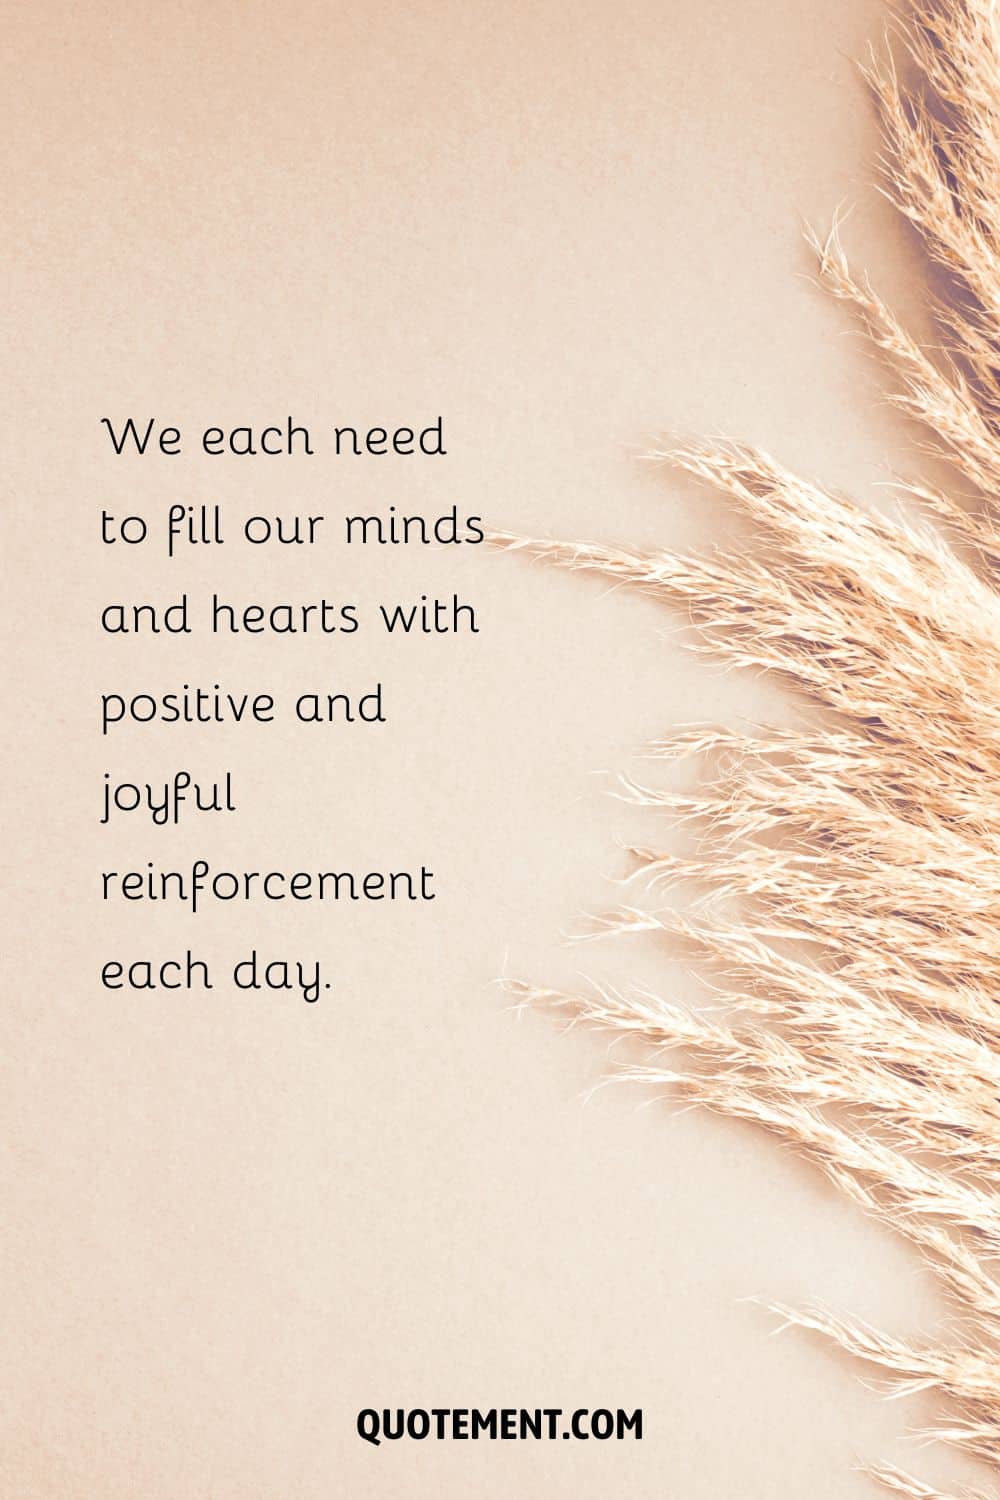 “We each need to fill our minds and hearts with positive and joyful reinforcement each day.” — Kathy Henn